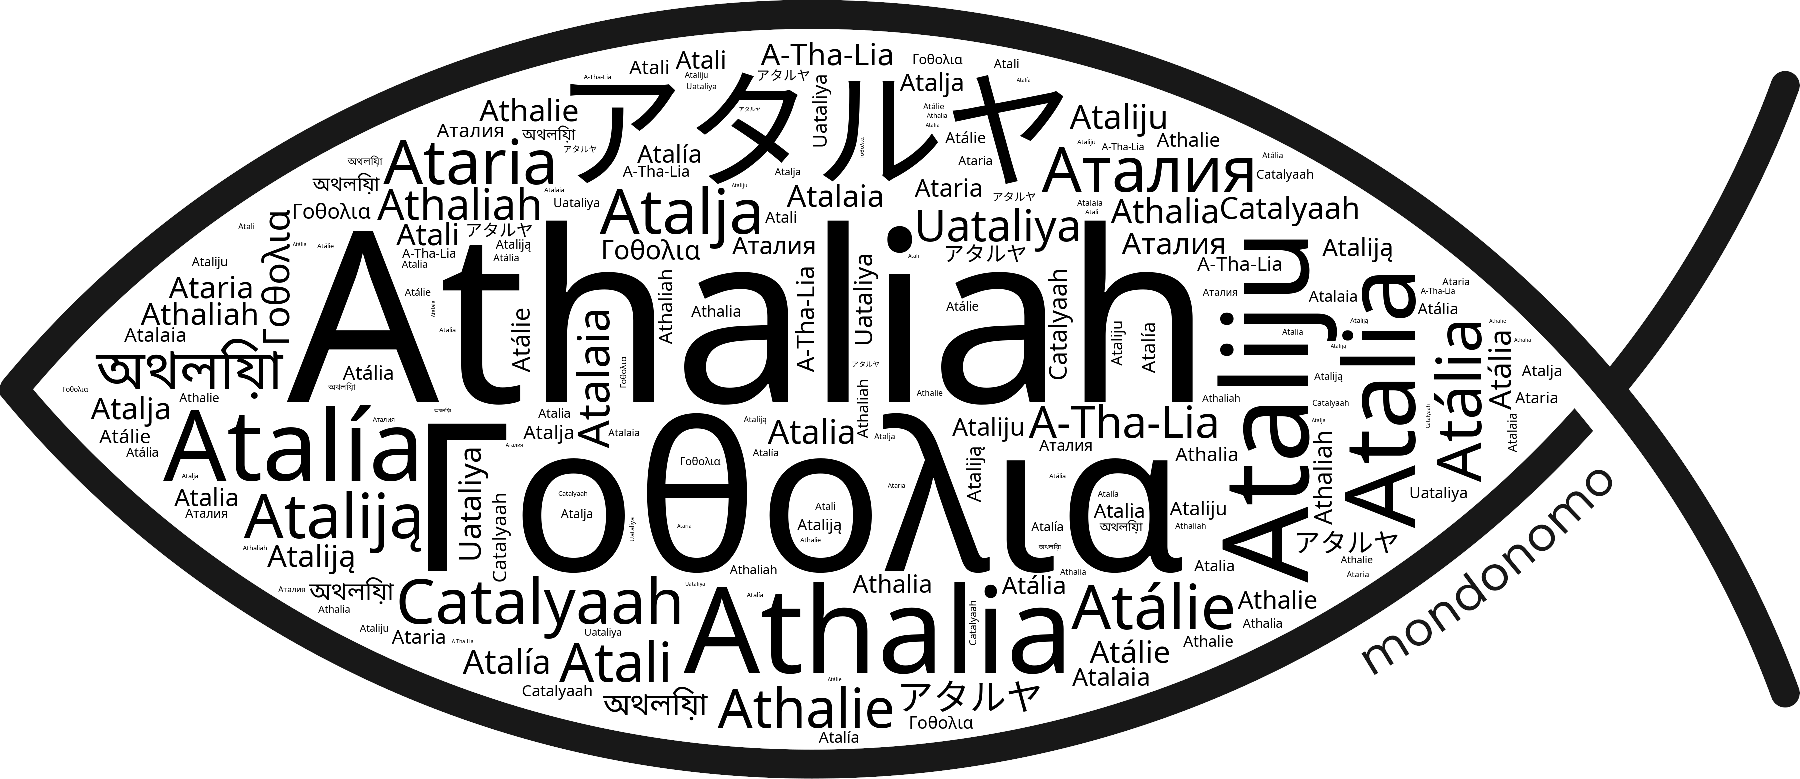 Name Athaliah in the world's Bibles